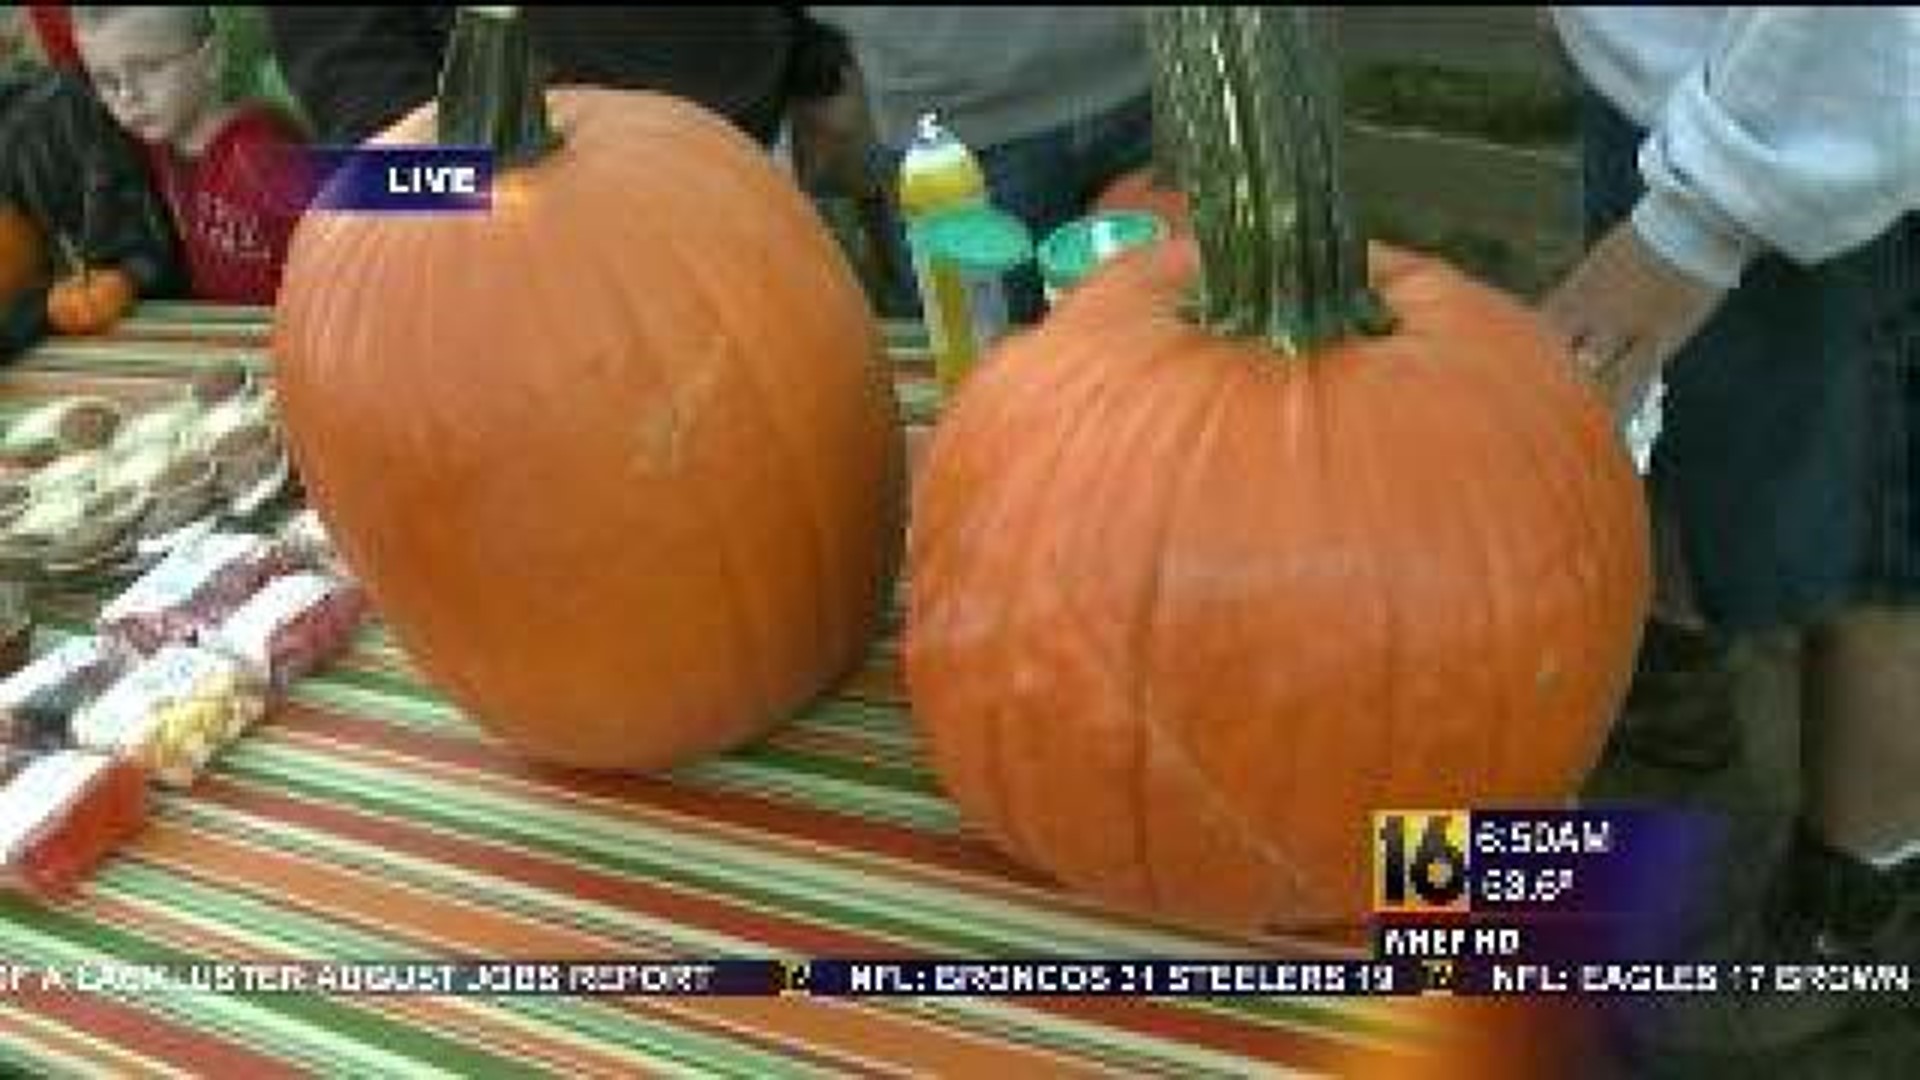 Gourd Growing: Tips To Preserve Your Pumpkin